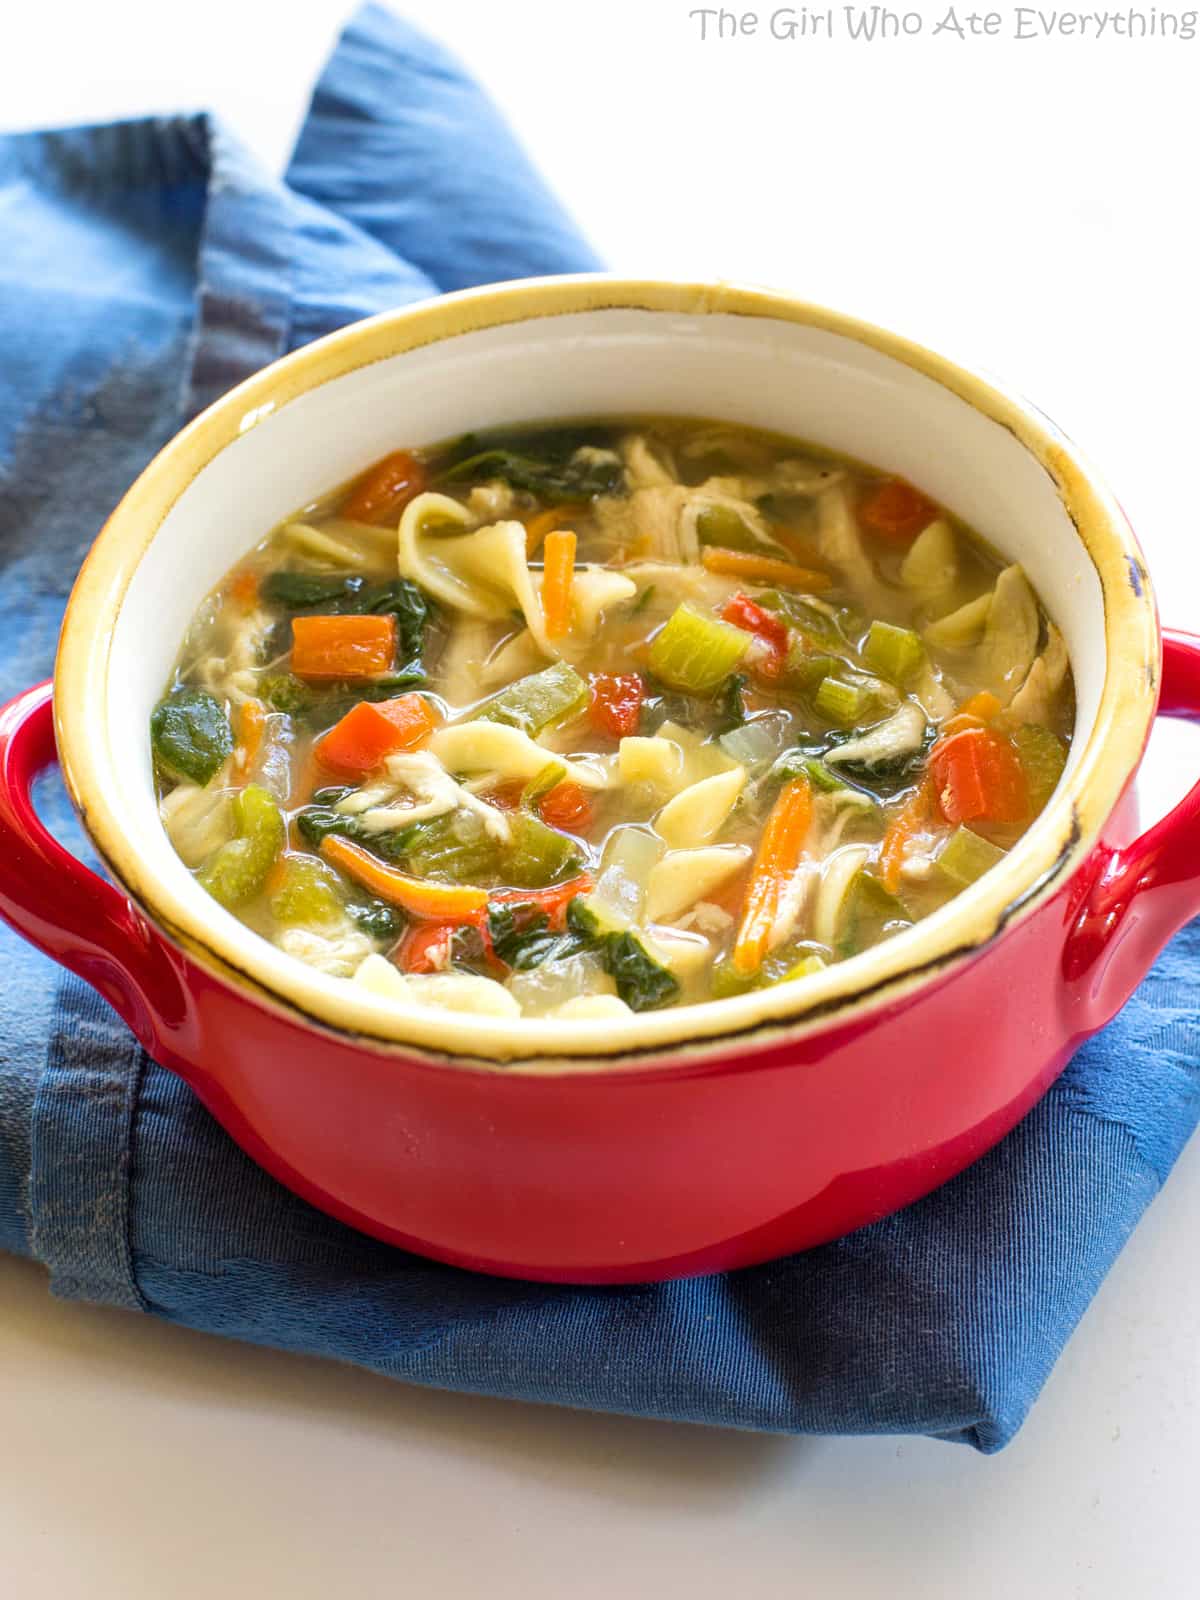 Healthy Vegetable Chicken Soup - The Girl Who Ate Everything